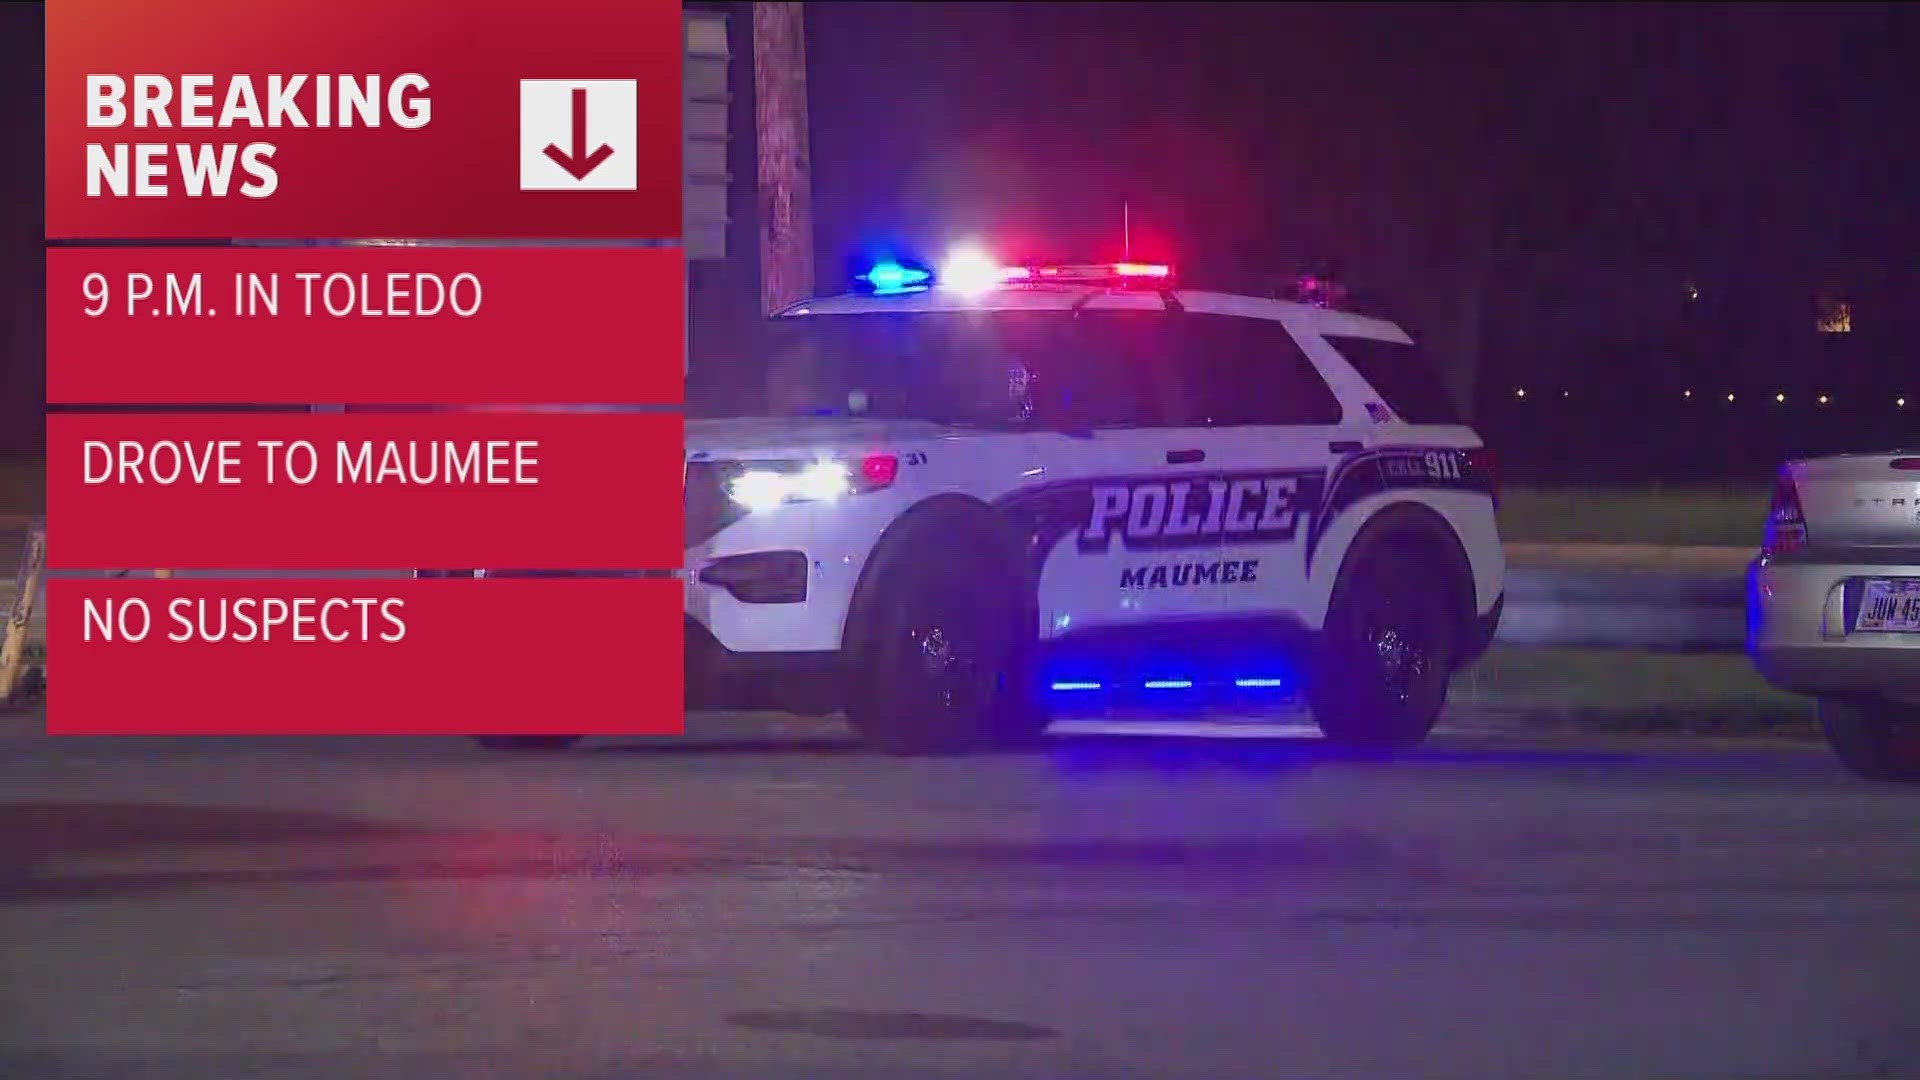 According to Toledo police, the shooting began in south Toledo and the victims then drove into Maumee where police and first responders arrived.